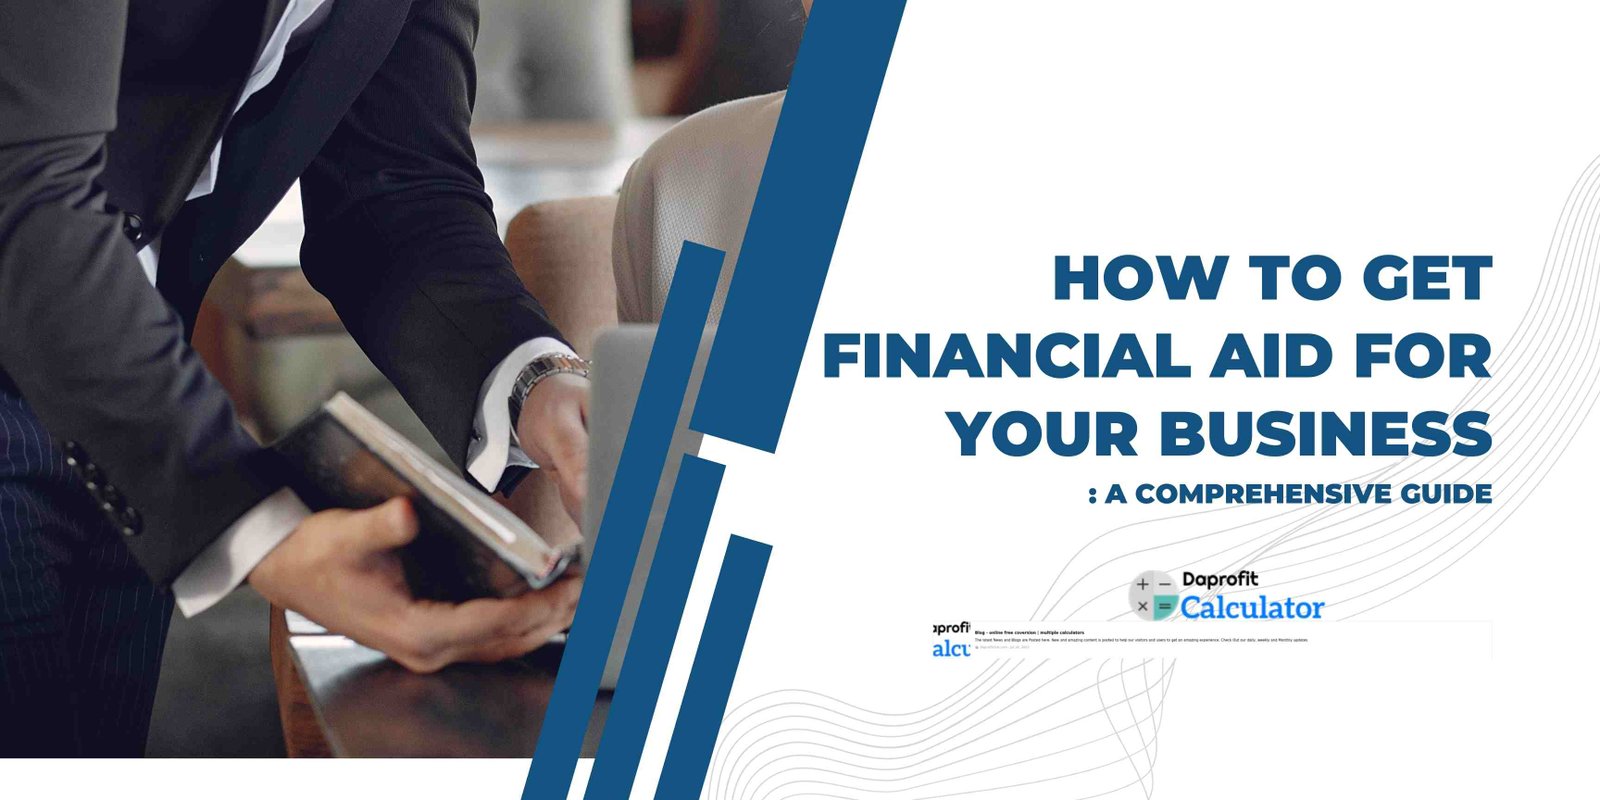 How to Get Financial Aid for Your Business: A Comprehensive Guide